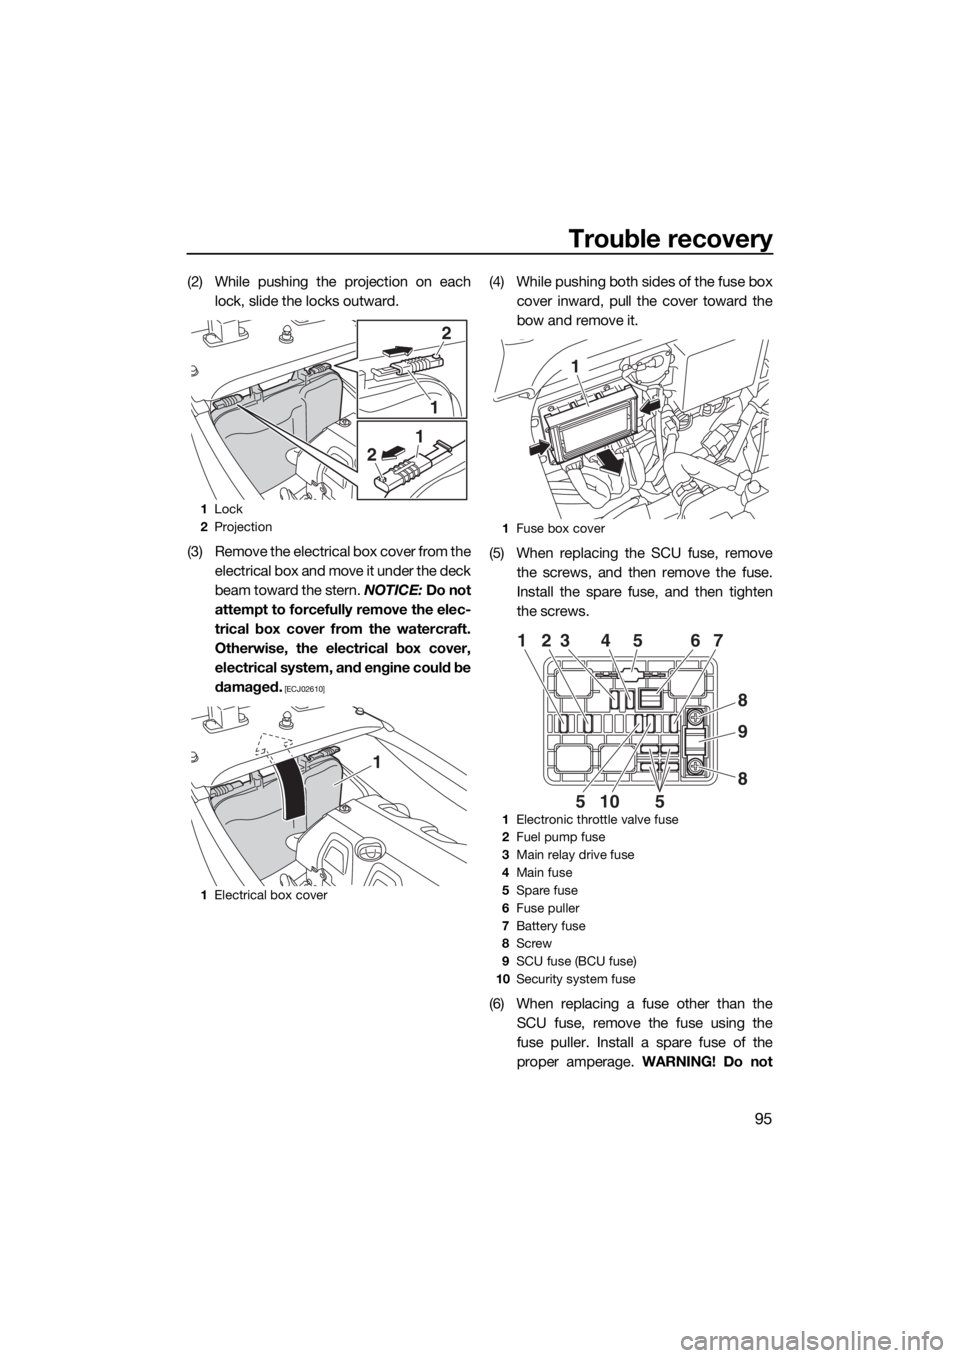 YAMAHA VX CRUISER HO 2017  Owners Manual Trouble recovery
95
(2) While pushing the projection on each
lock, slide the locks outward.
(3) Remove the electrical box cover from the
electrical box and move it under the deck
beam toward the stern